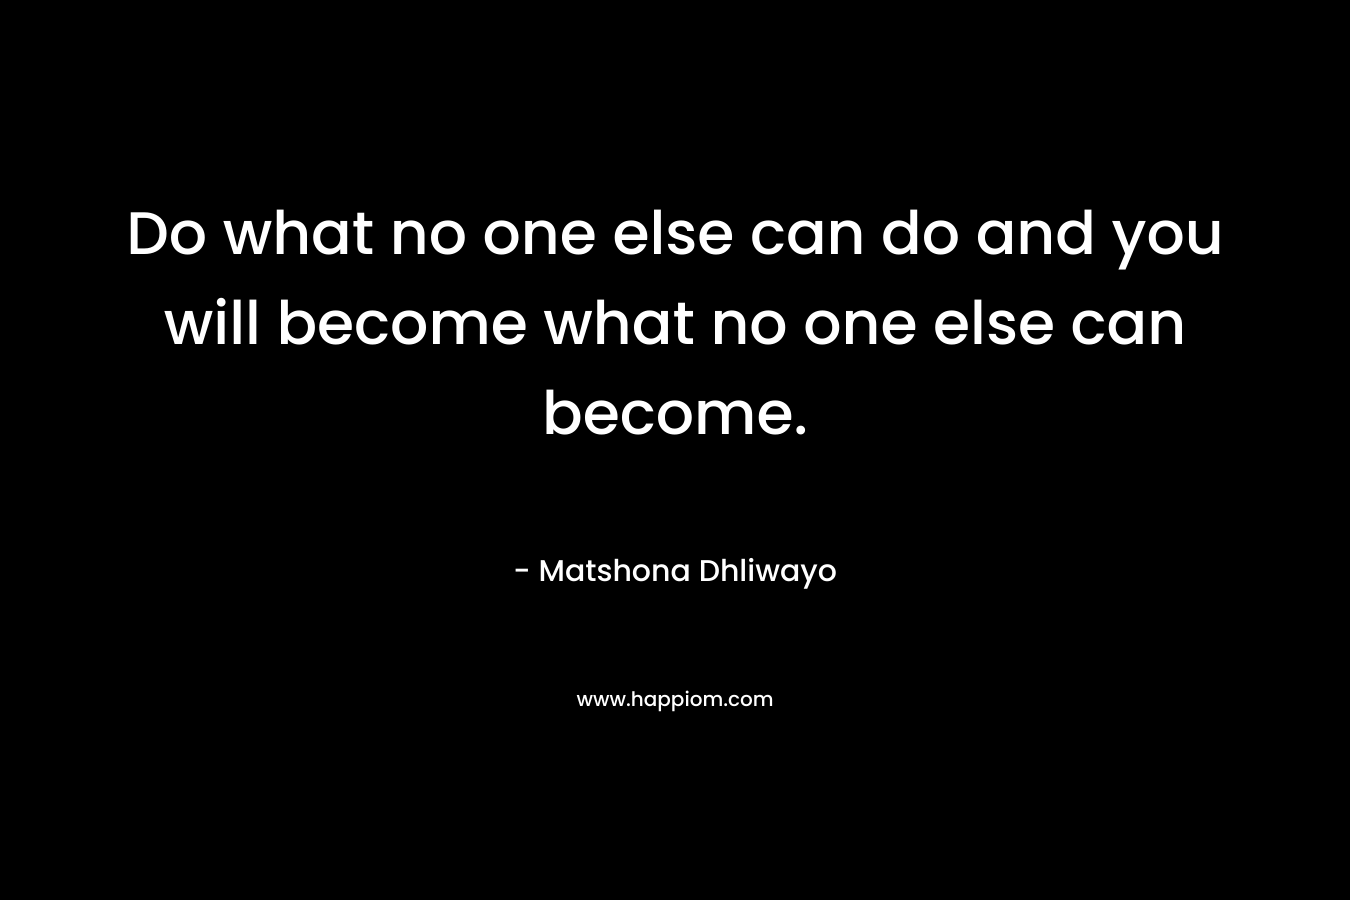 Do what no one else can do and you will become what no one else can become.